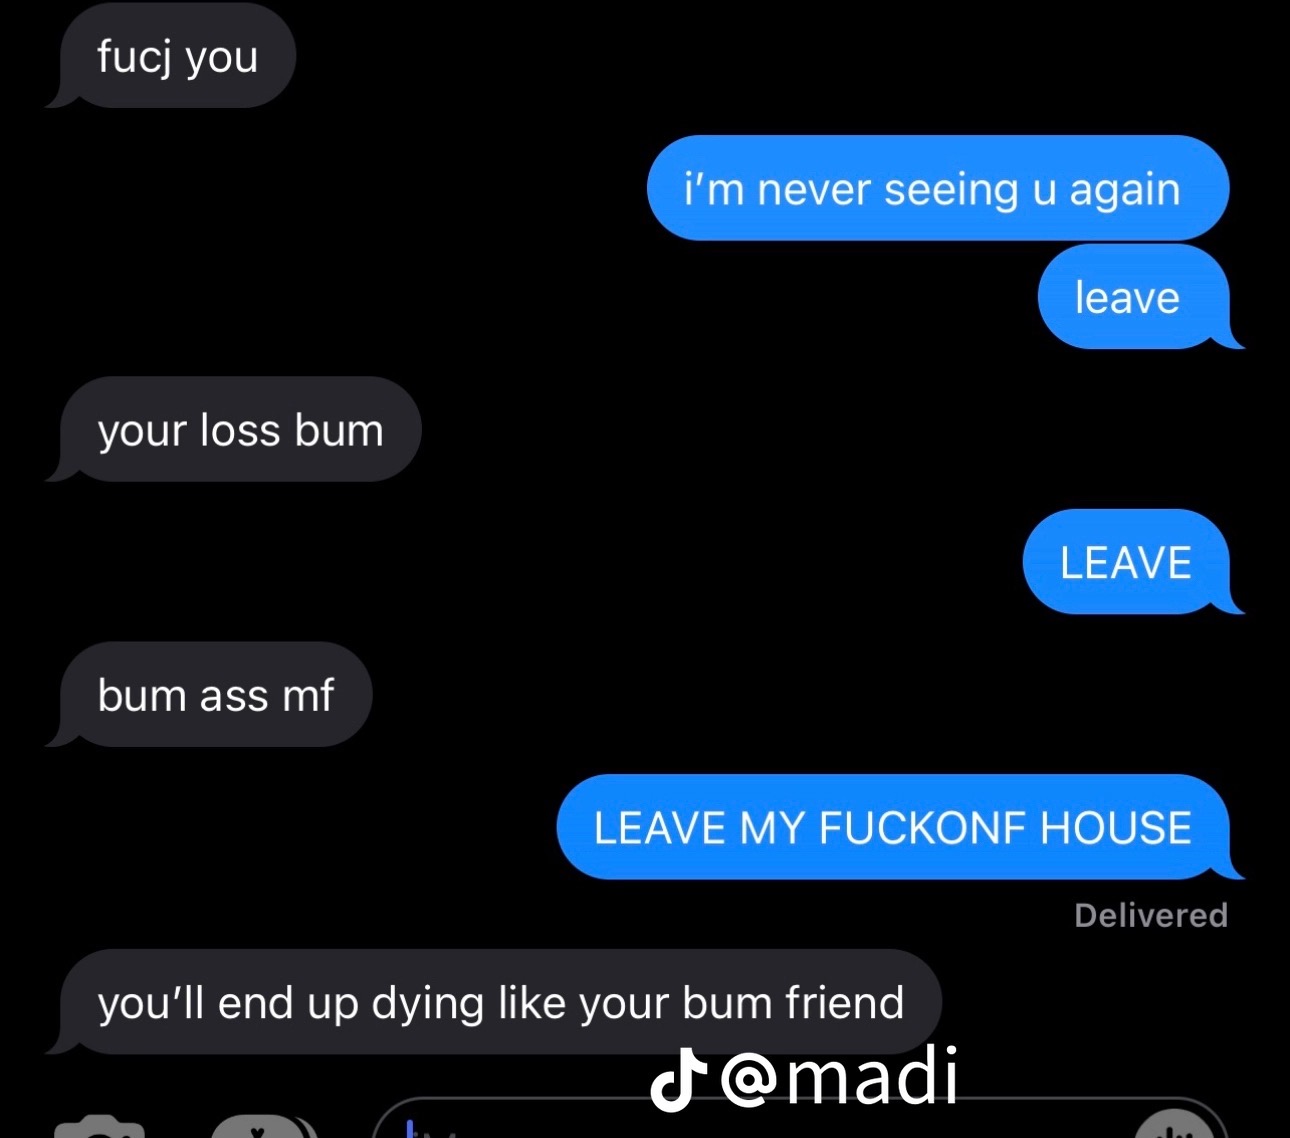 Madi Monroe exposed her former boyfriend, Nich Machat, by leaking his text messages. 